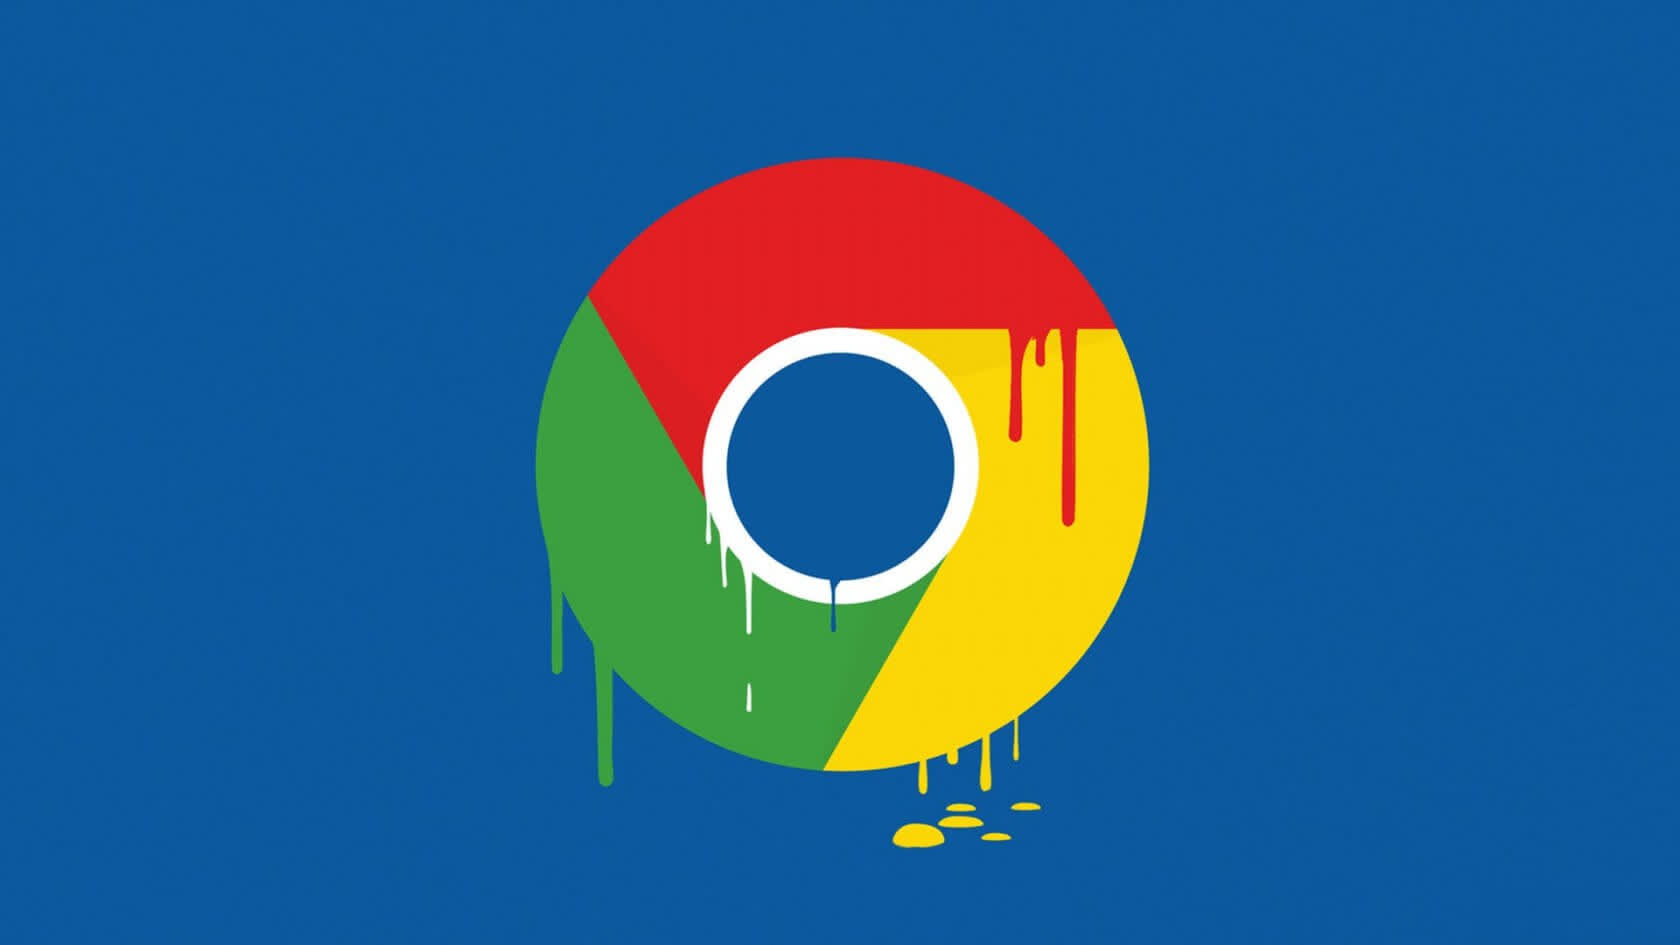 PSA: Google advises users to update Chrome as soon as possible